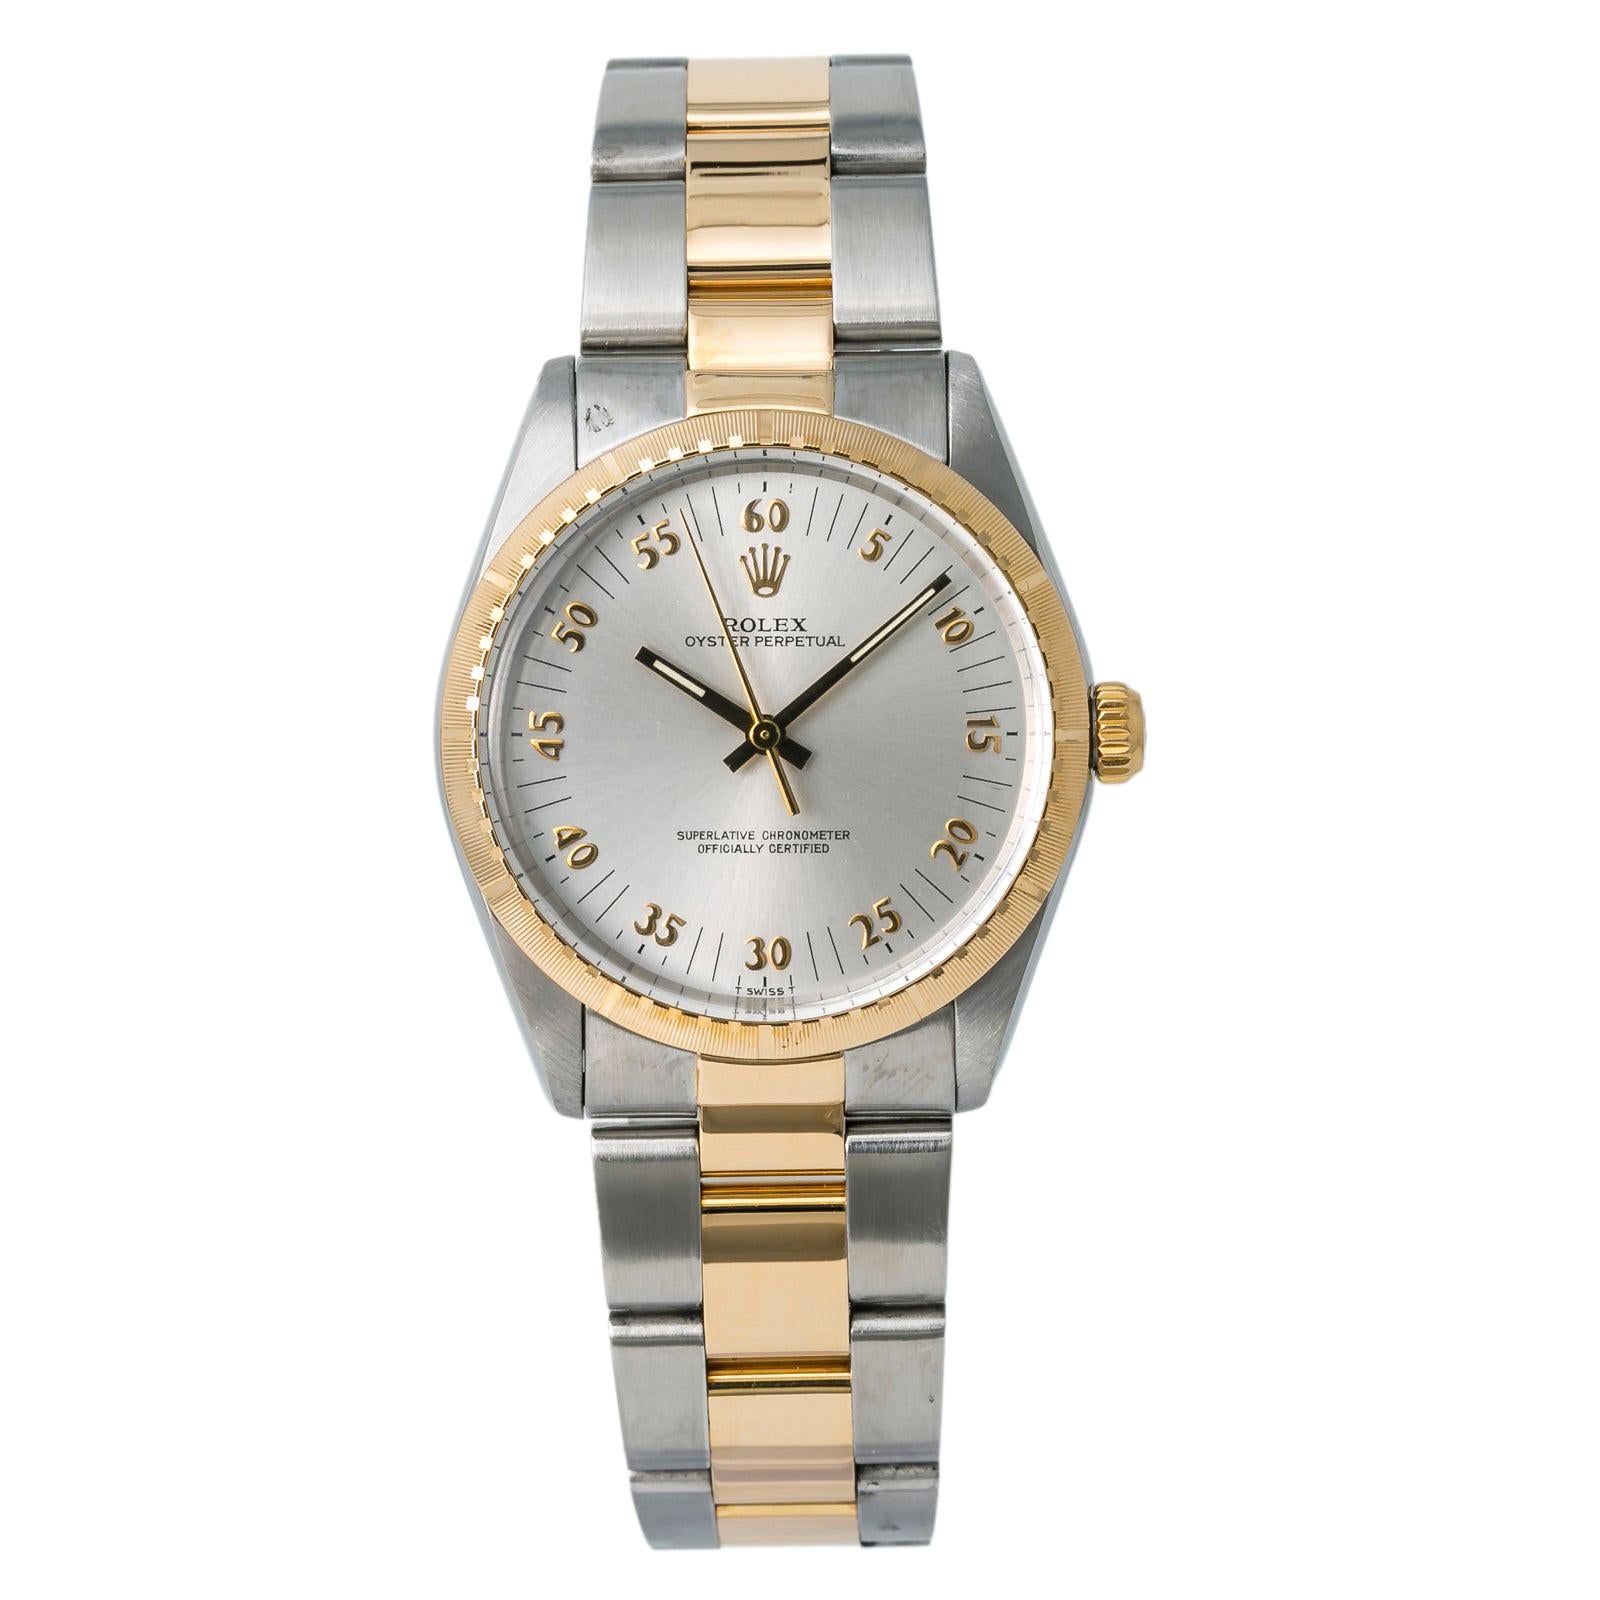 Rolex Oyster Perpetual 1038 Automatic Unisex Watch Two-Tone 18k YG